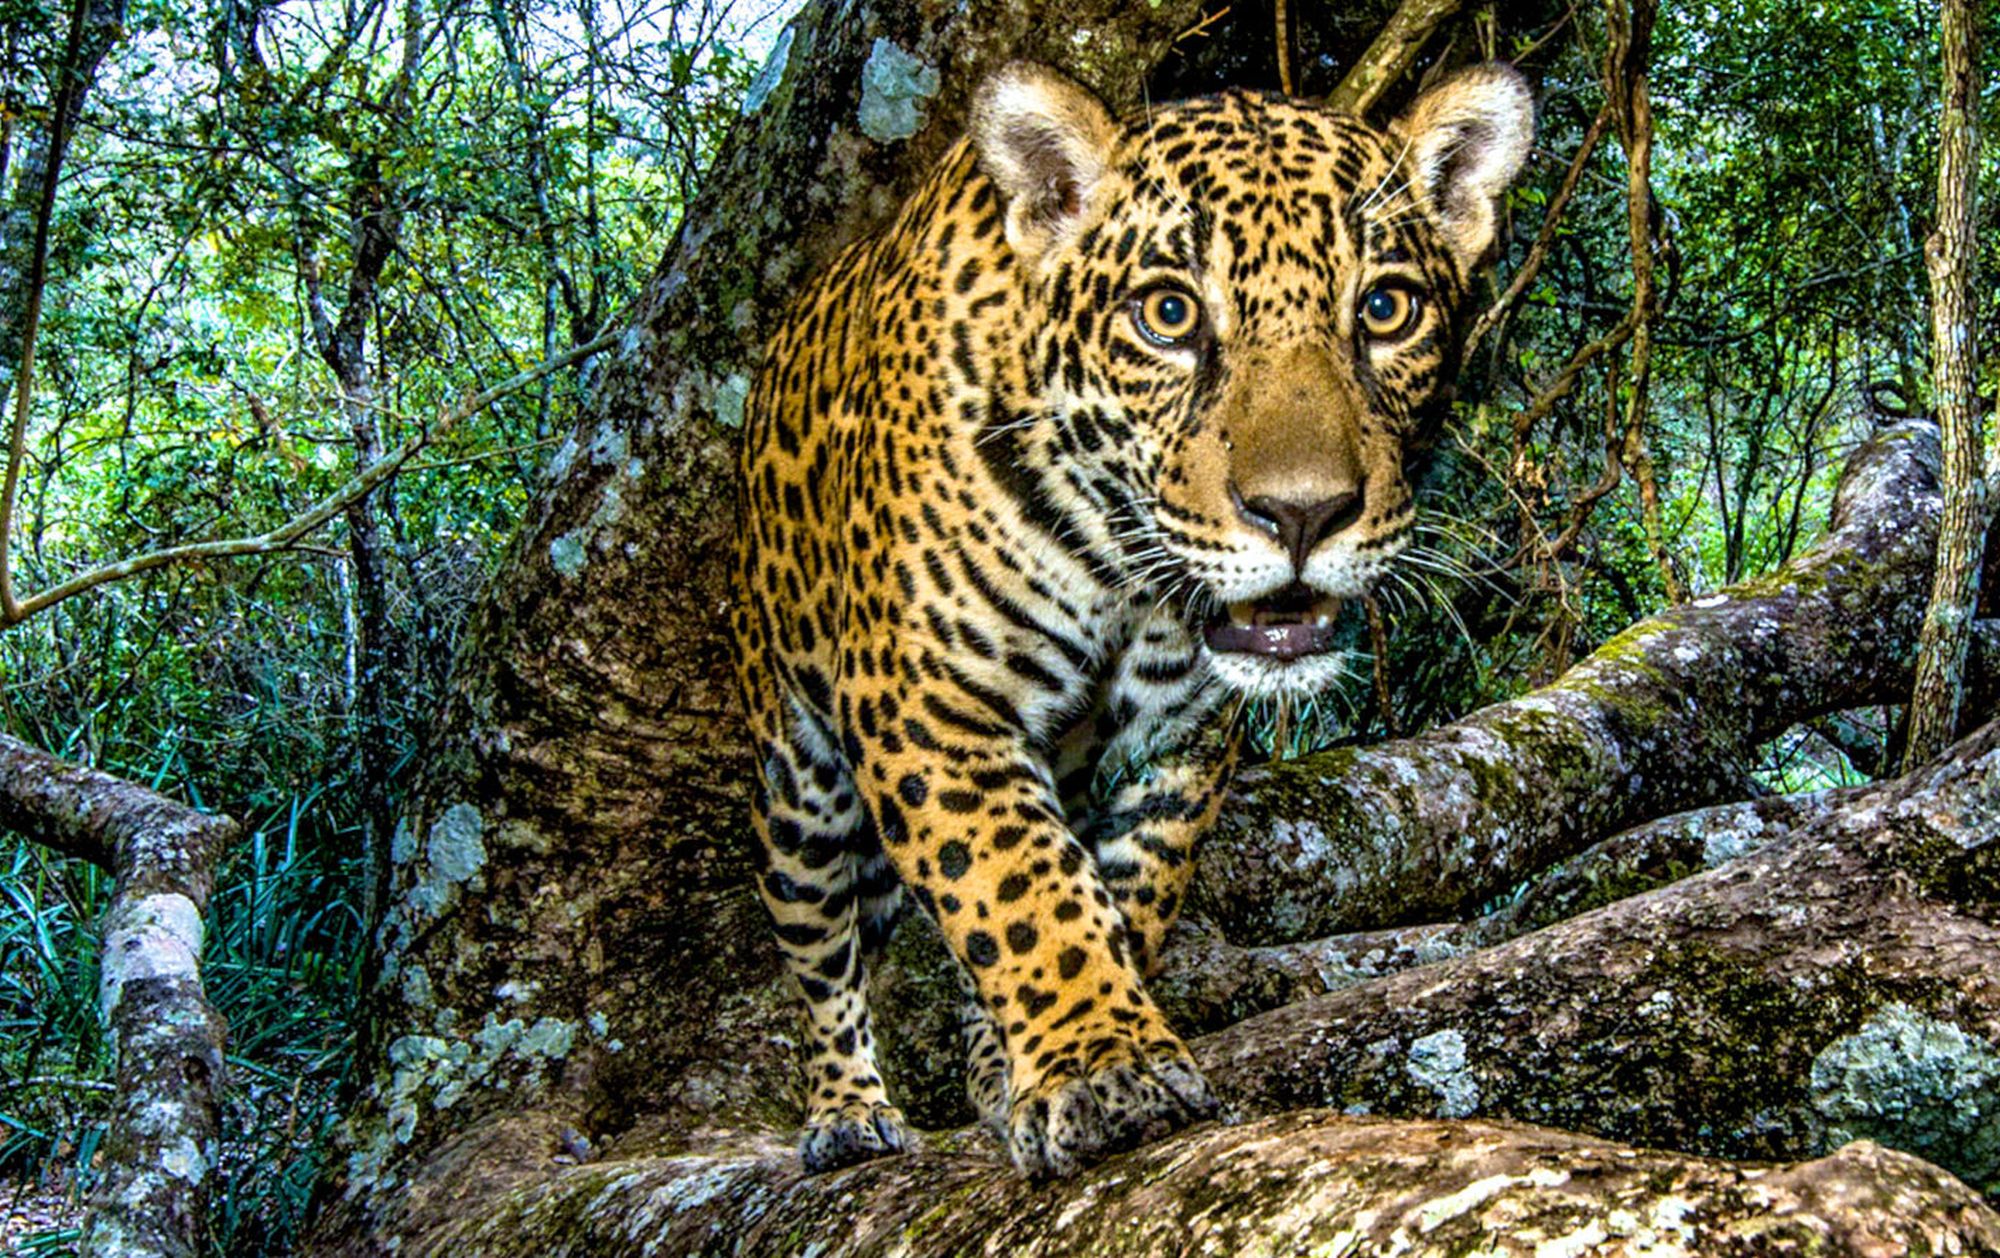 This young jaguar’s “portrait” was captured by a remote camera. Image © Steve Winter/National Geographic/Big Cat Voices.